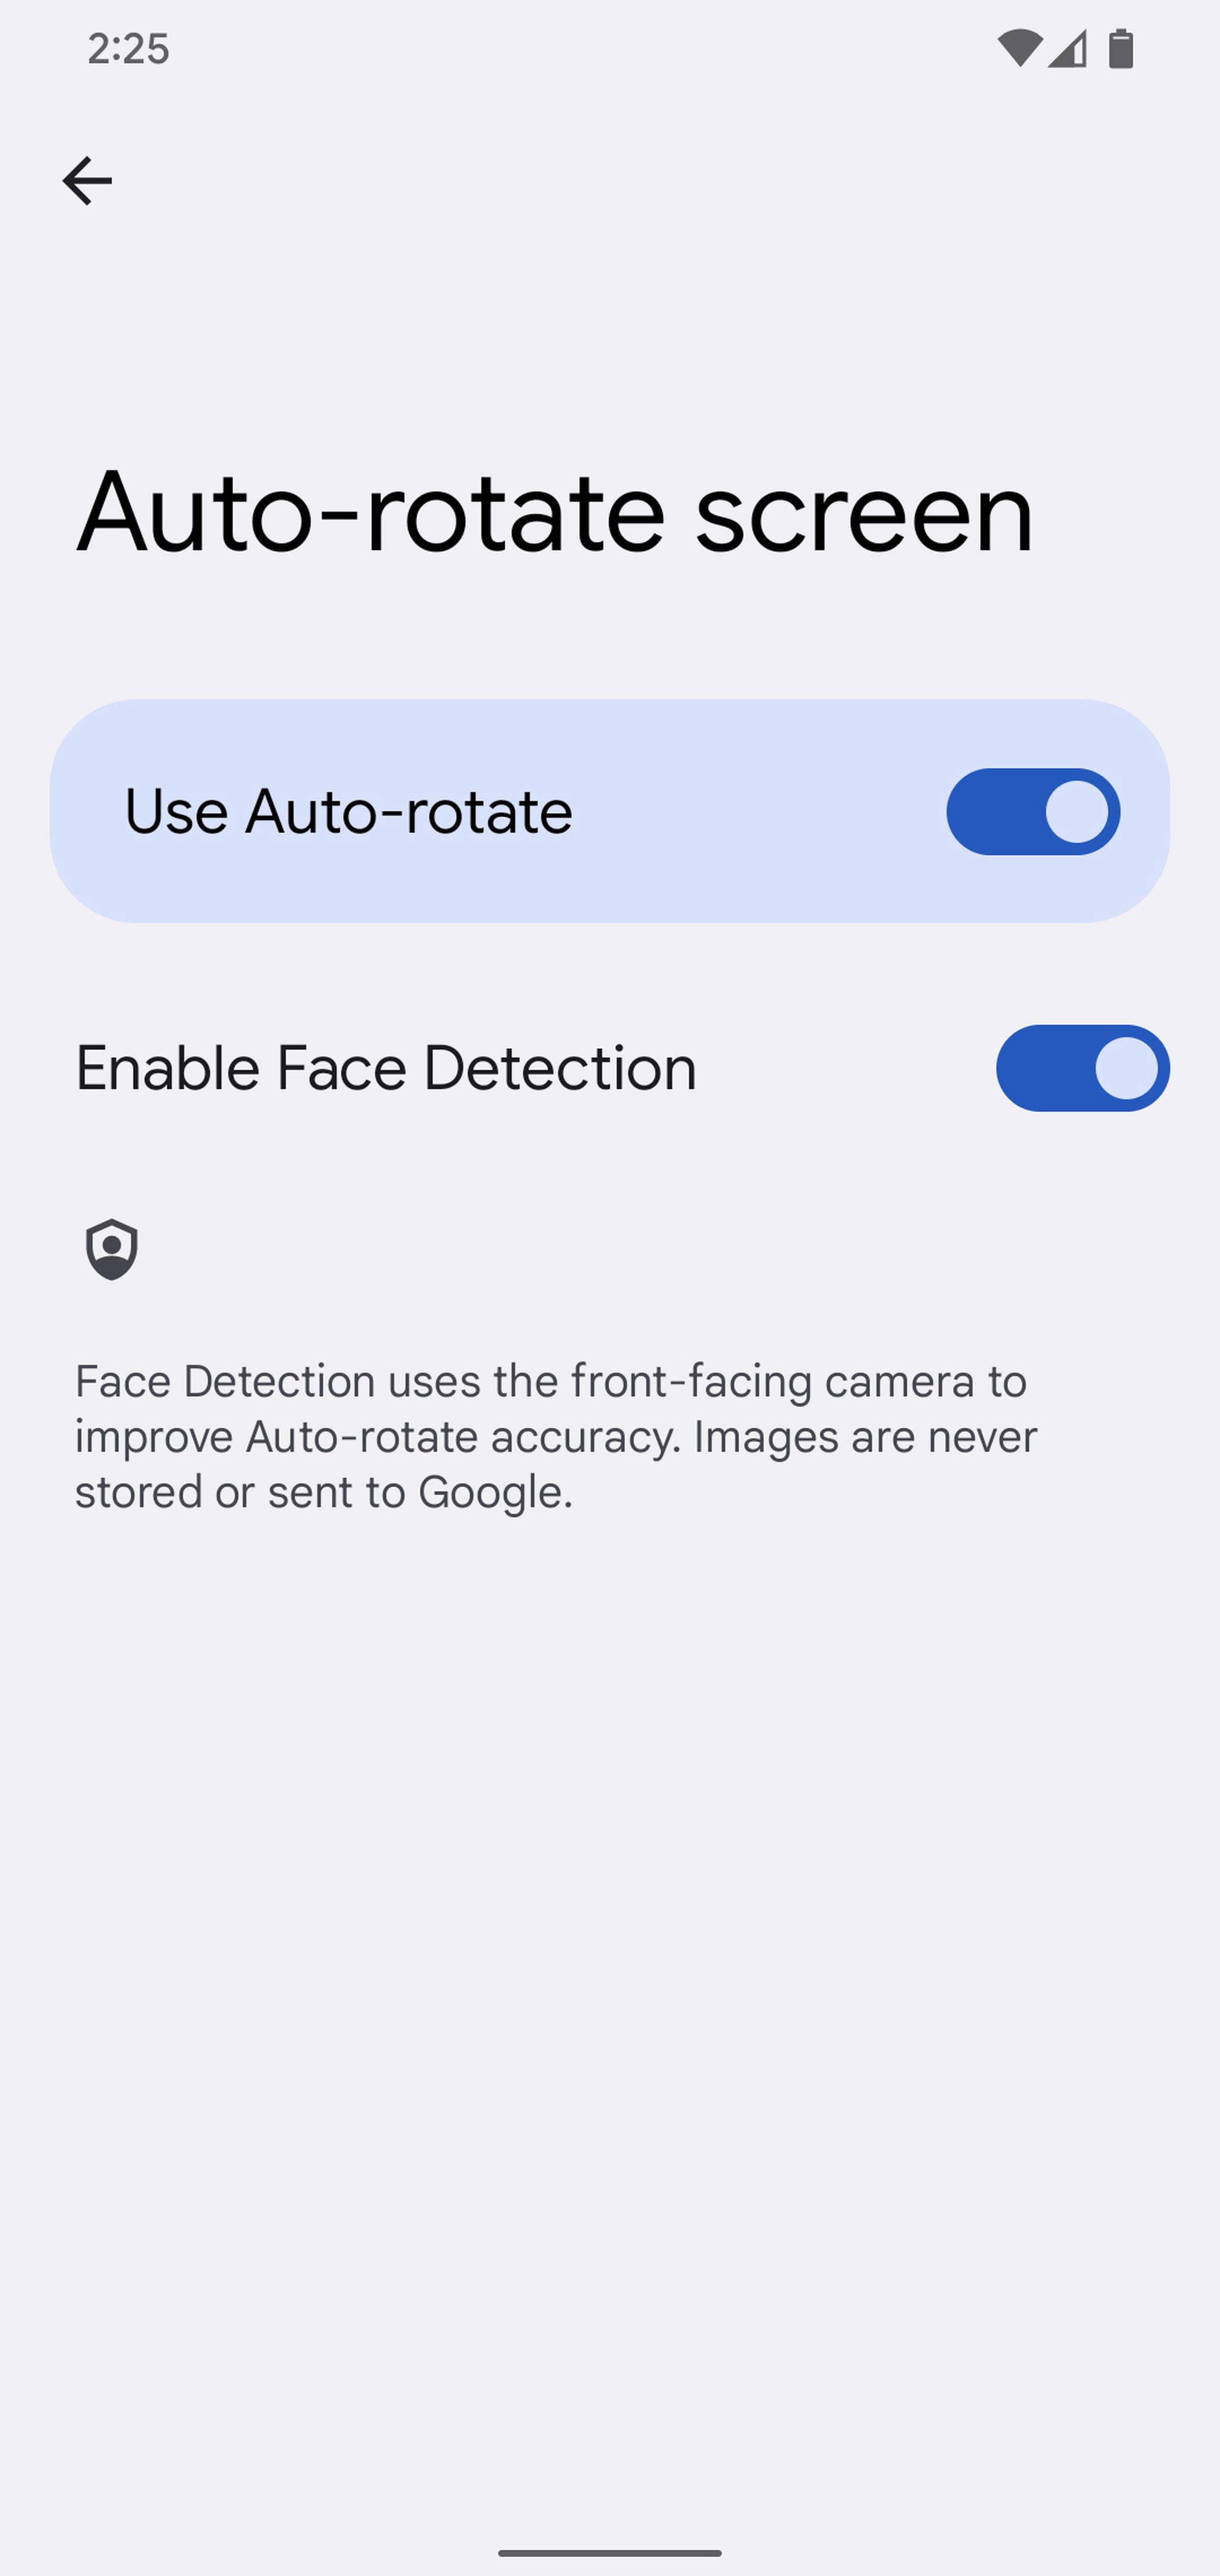 Once you turn on the auto-rotate, you can then enable face detection.